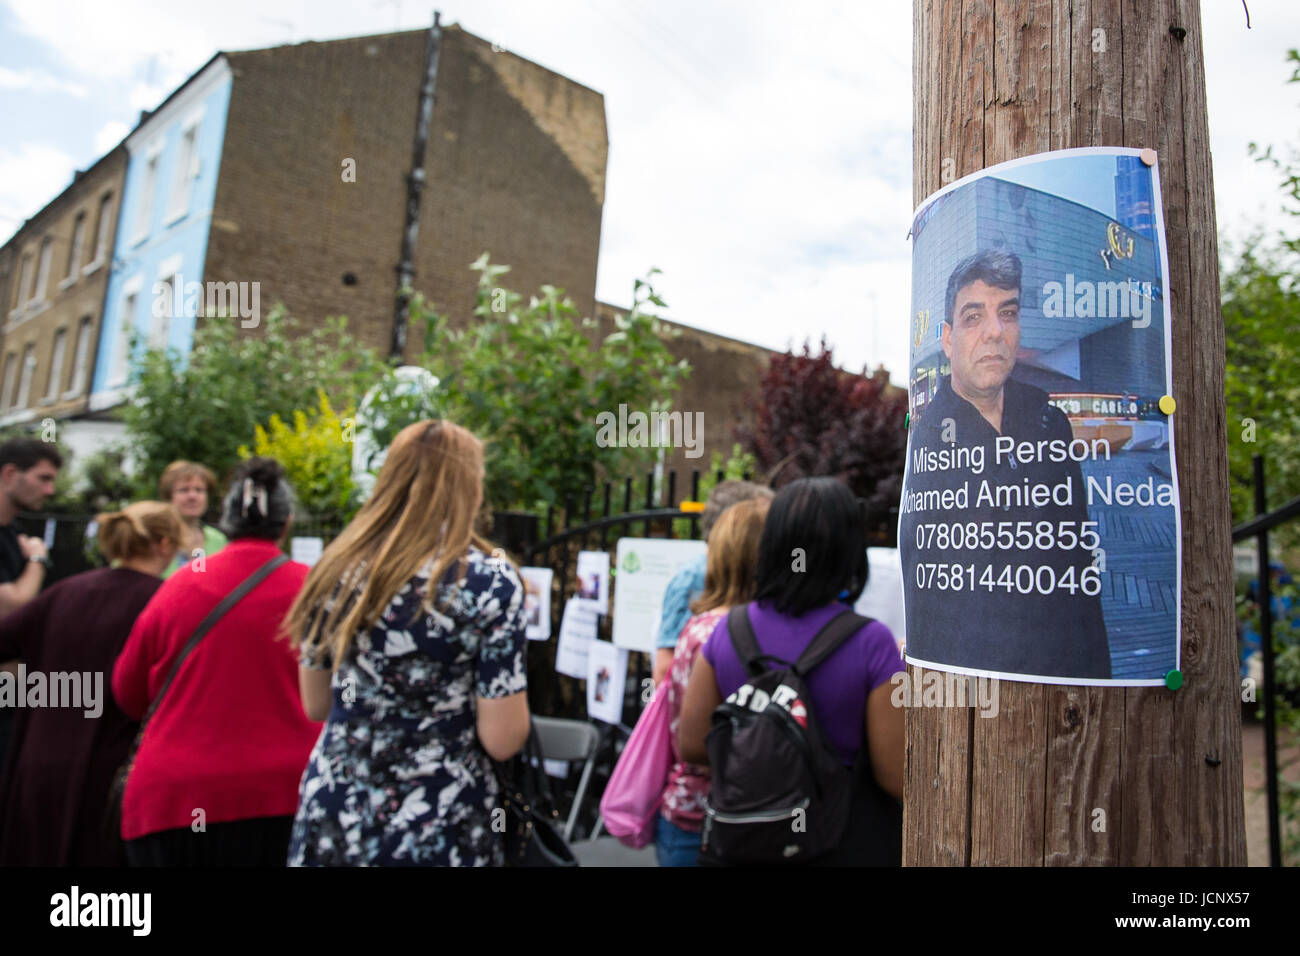 London, UK. 16th June, 2017. A notice seeking information about Mohamed Amied Neda following the fire in the Grenfell Tower posted outside the church of St Clement and St James. Credit: Mark Kerrison/Alamy Live News Stock Photo